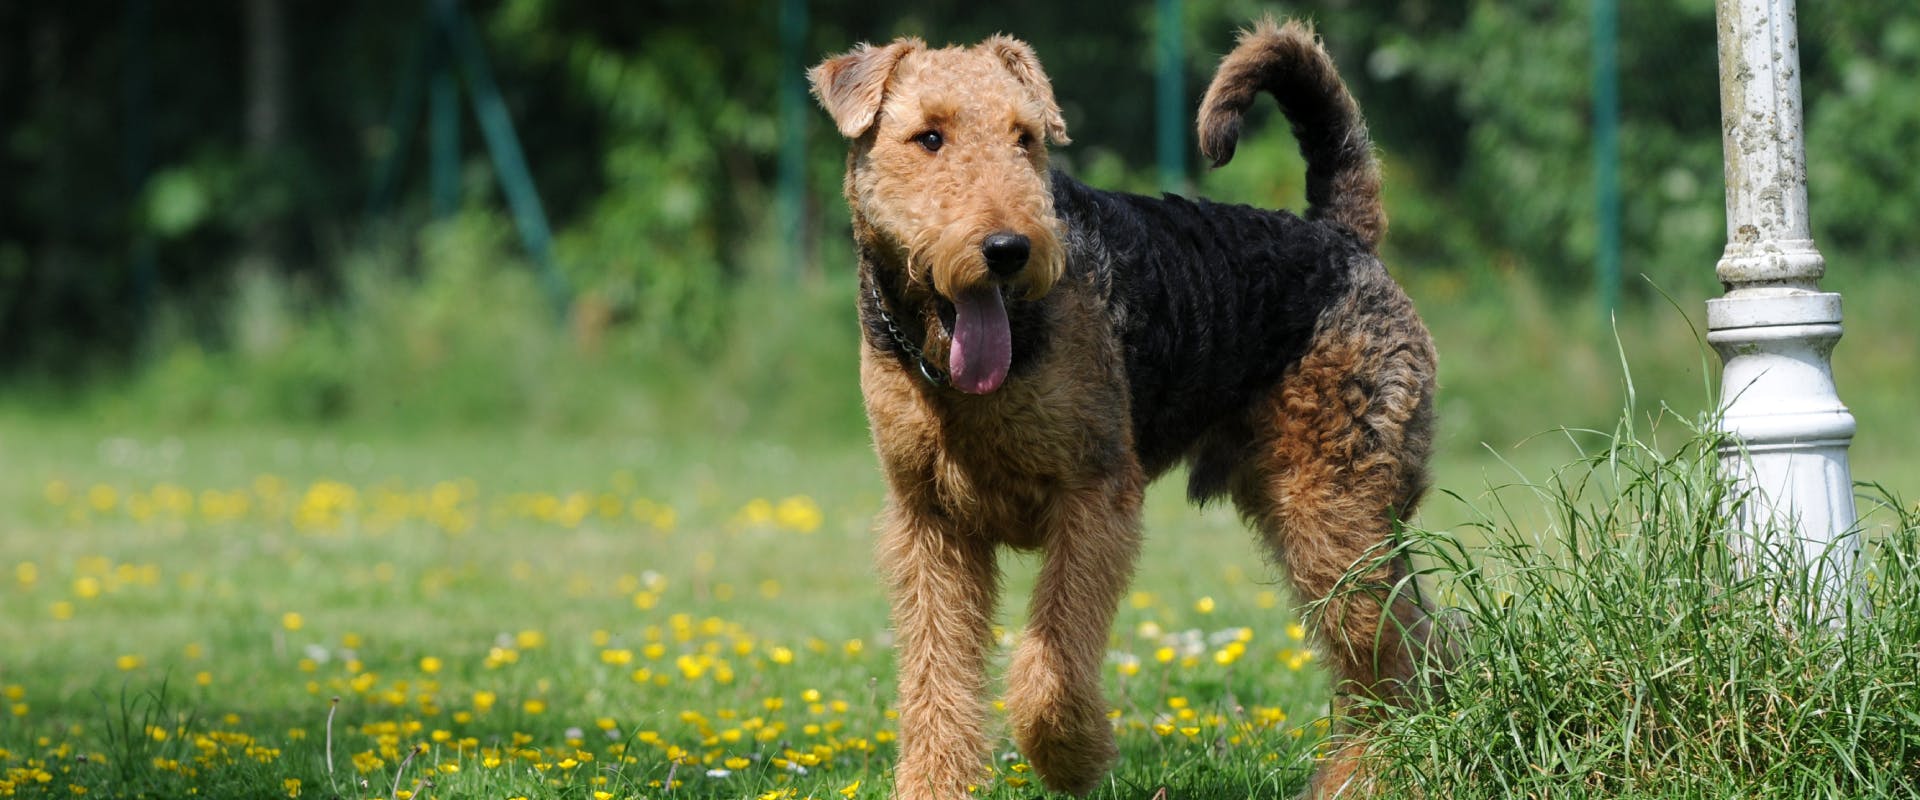 An Airedale Terrier.